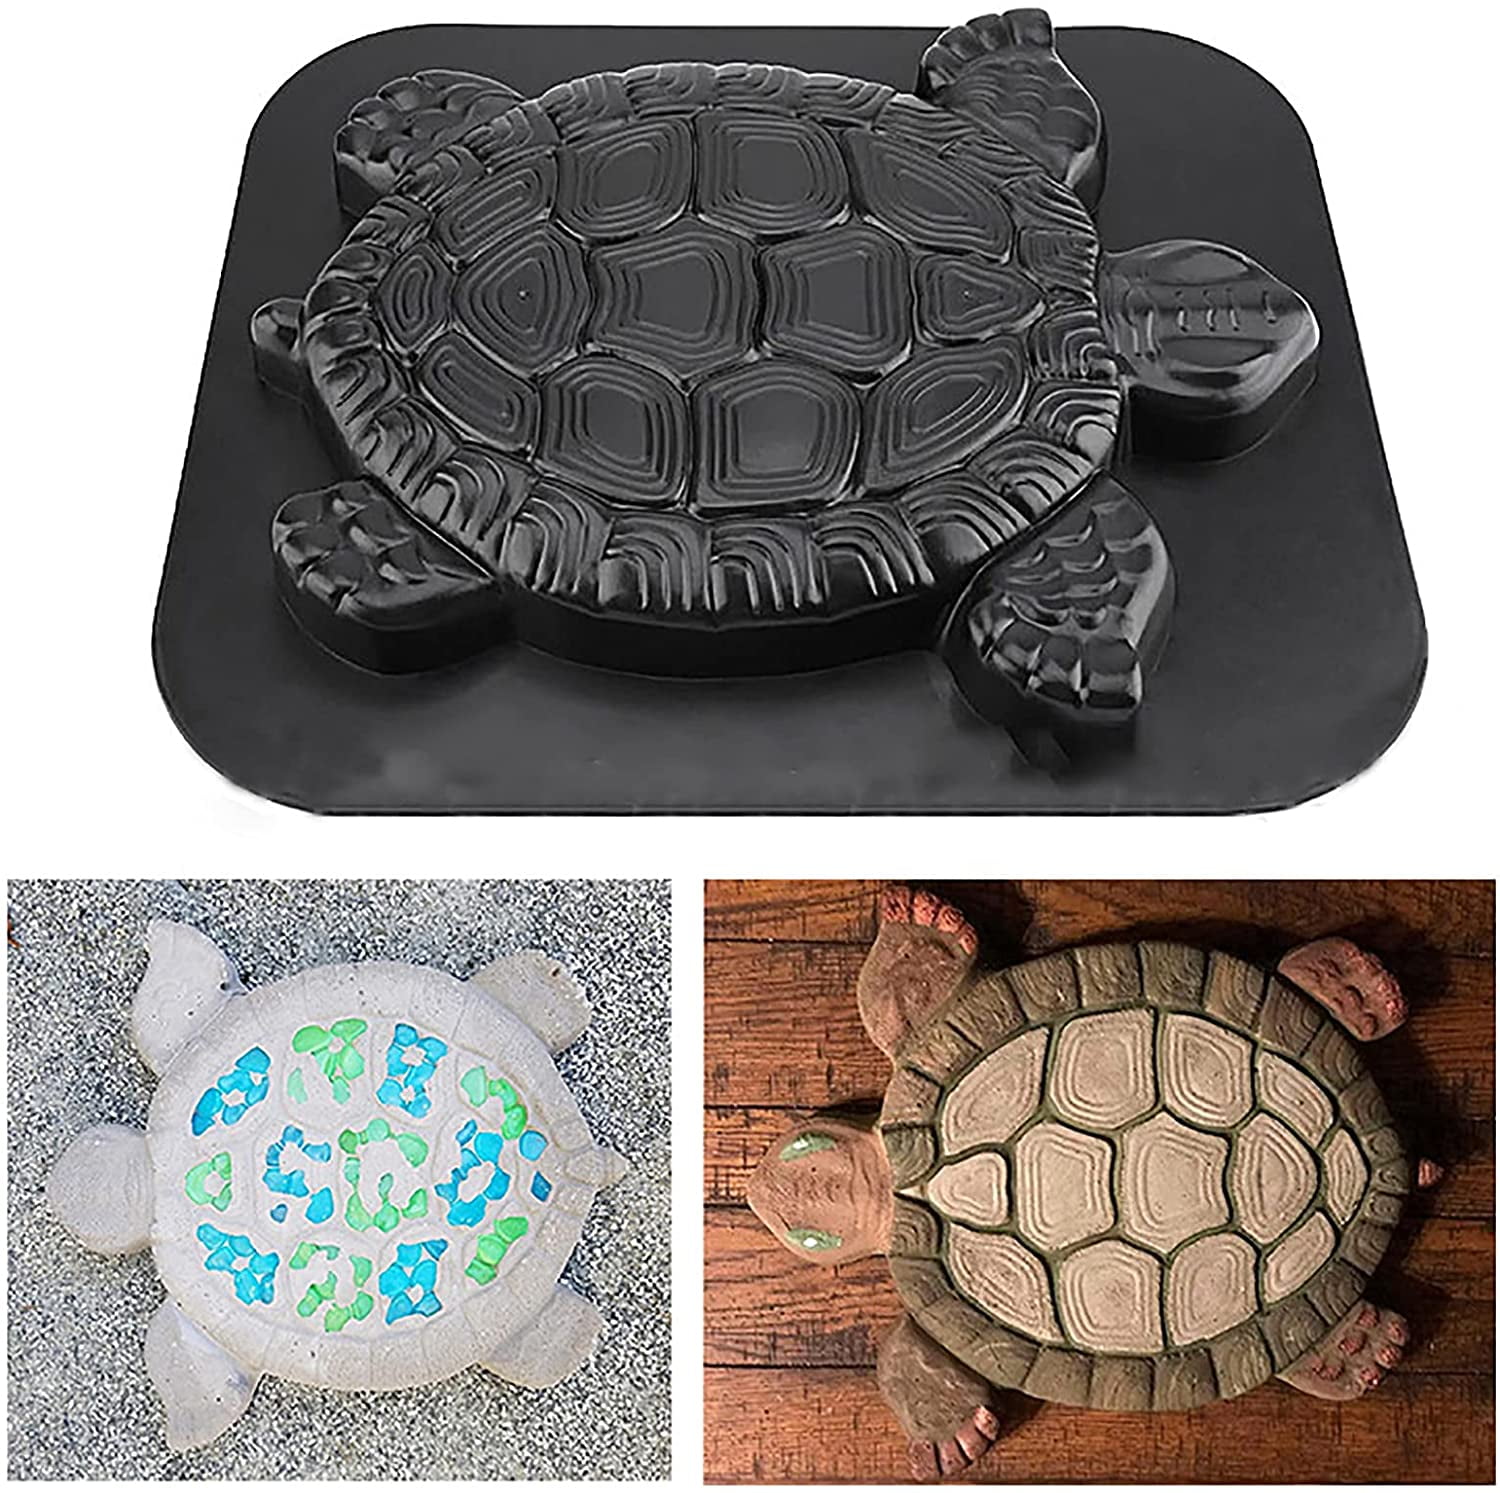 Turtle Stepping Stone Mold for Garden Stepping Stone Mold Garden Lawn Path Paver Walk Stepping Stone Molds for Concrete Reusable 